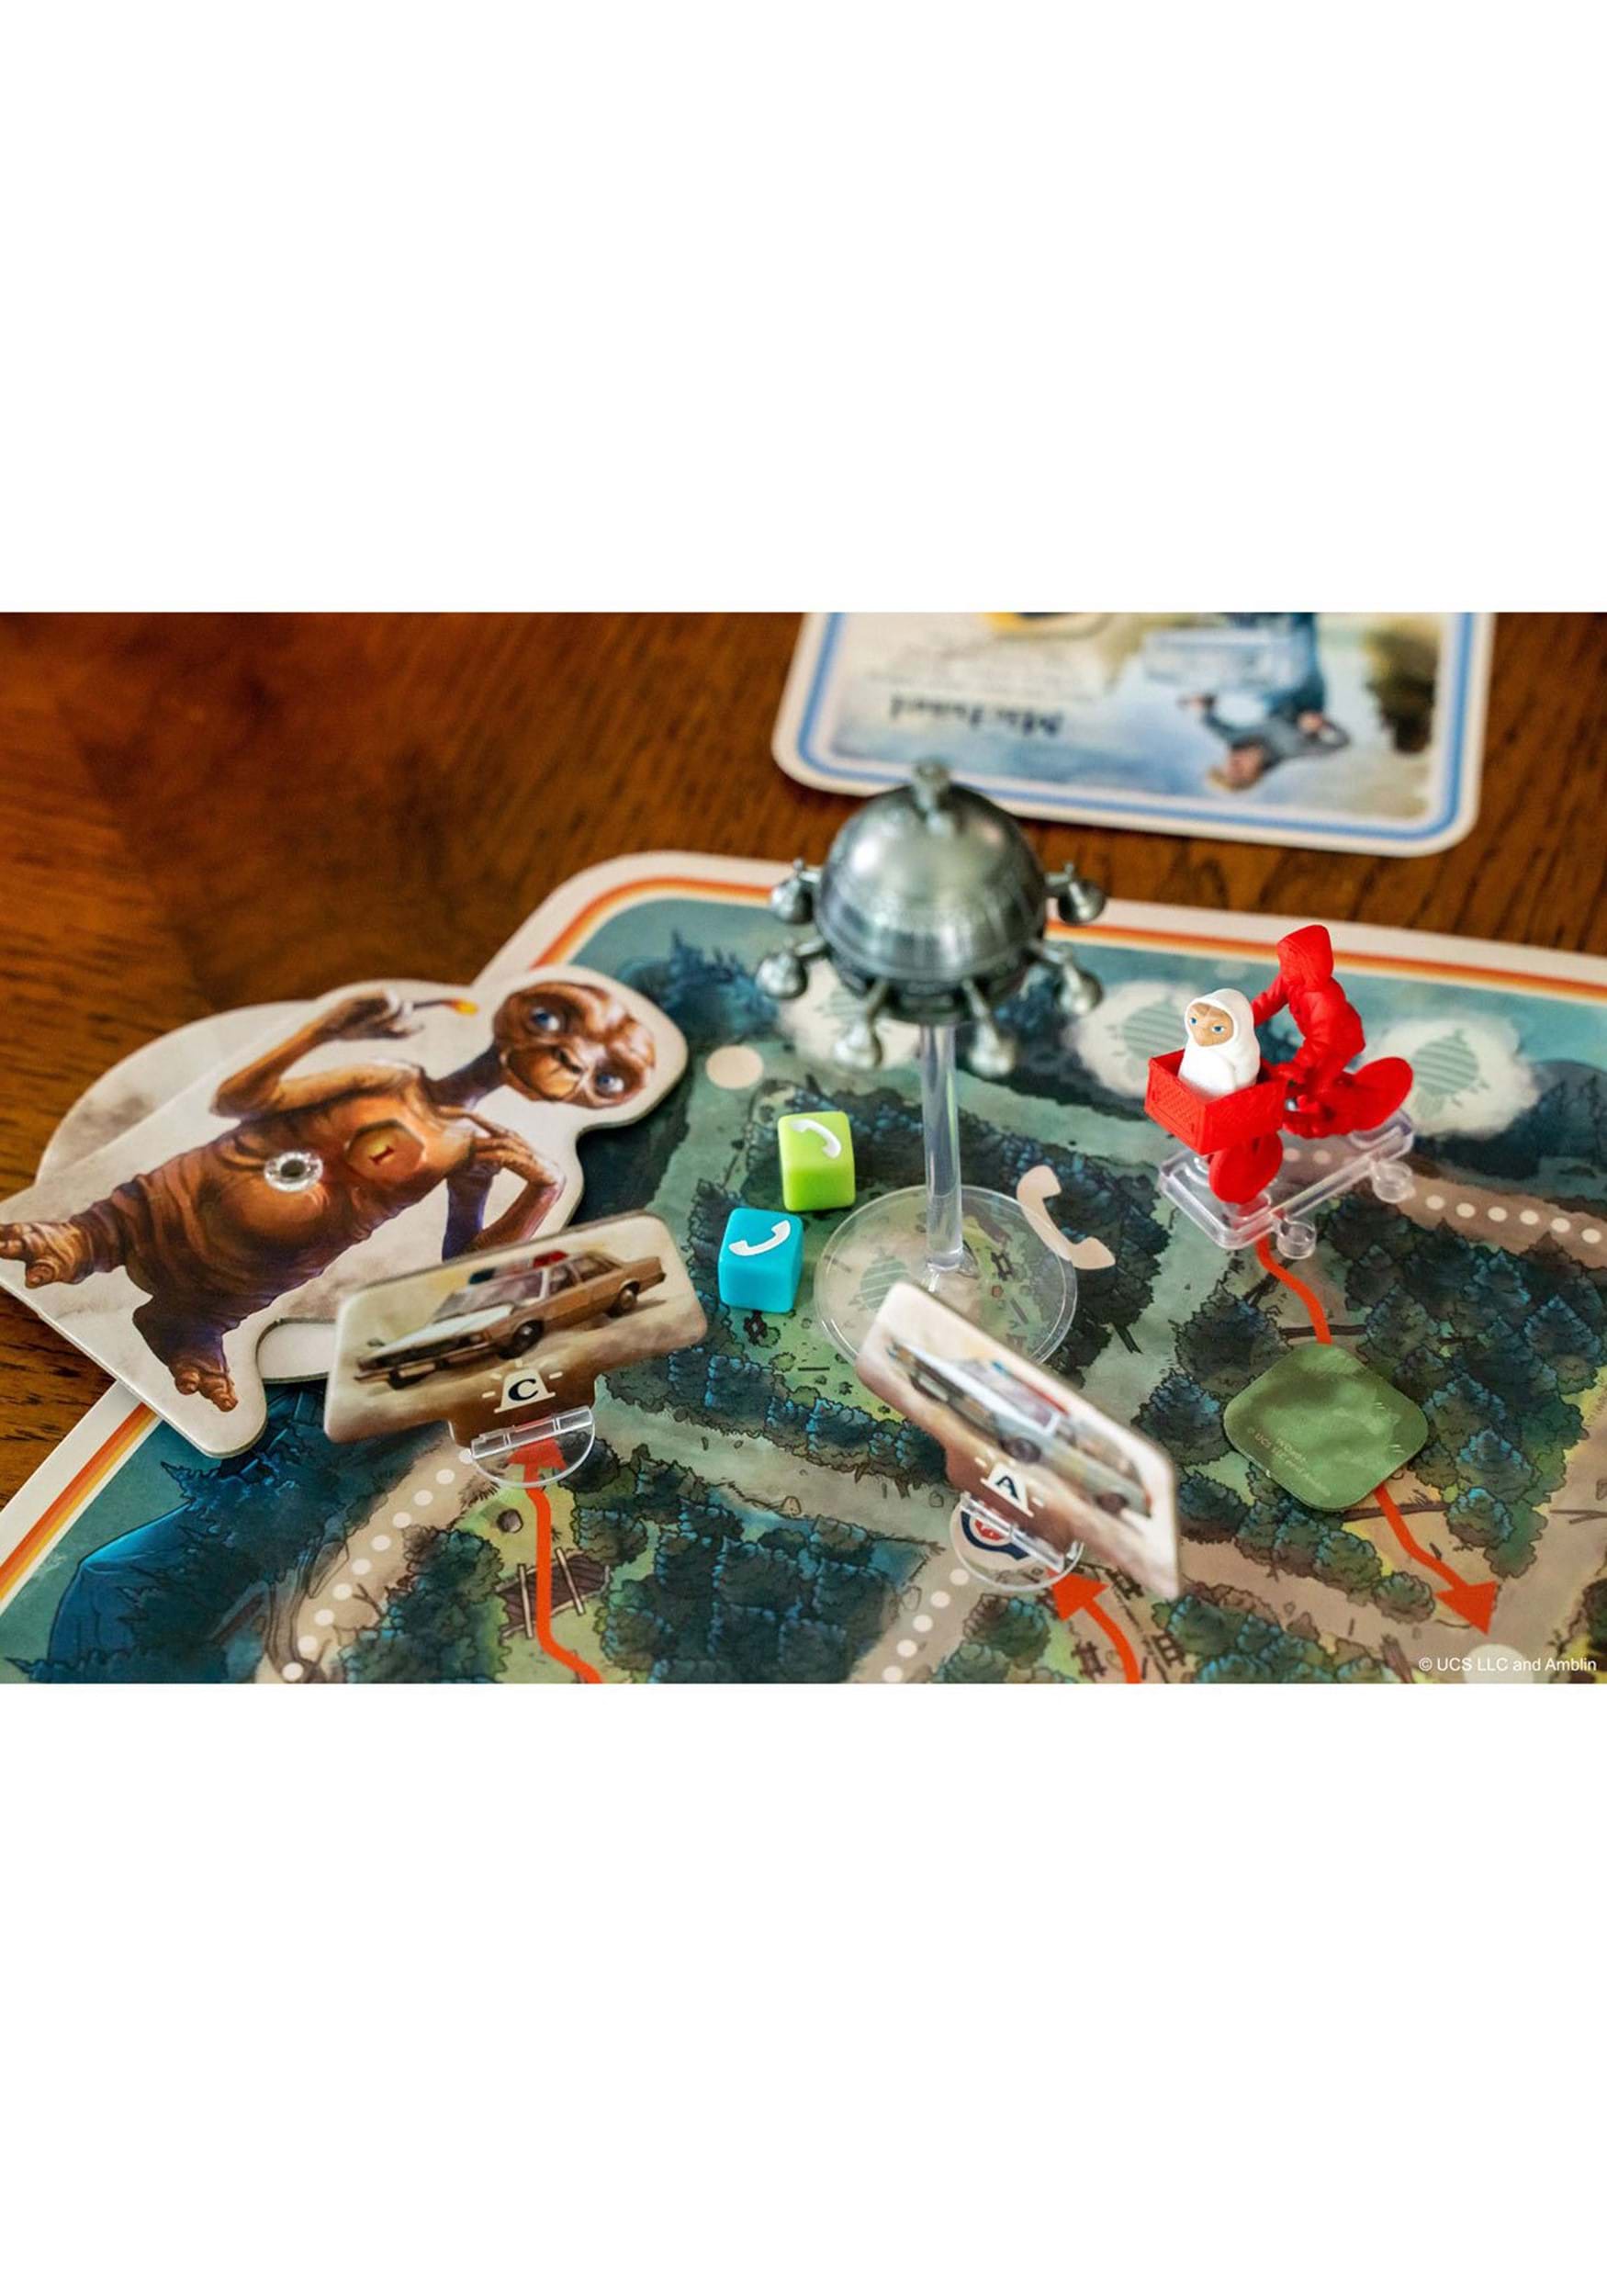 E.T. The Extraterrestrial Light Years From Home Funko Games